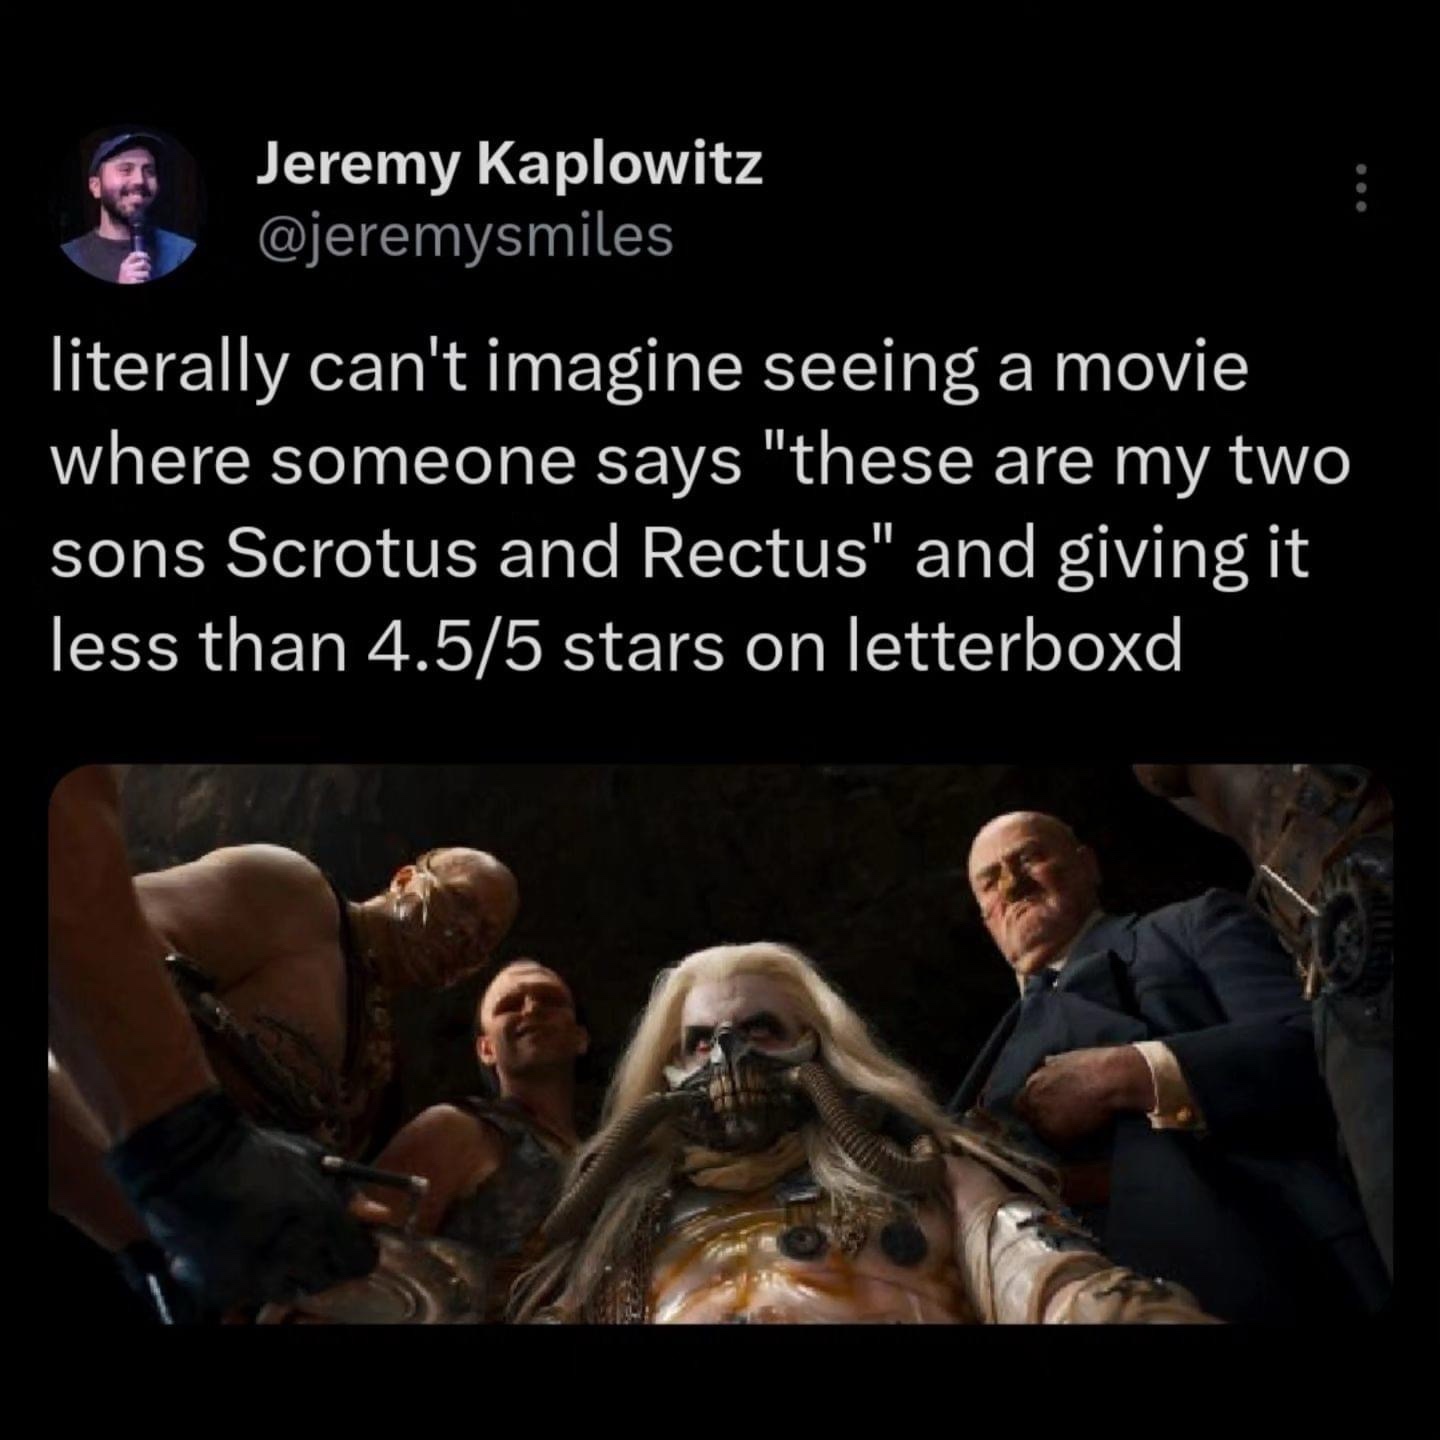 funny memes - furiosa trailer immortan joe - Jeremy Kaplowitz literally can't imagine seeing a movie where someone says "these are my two sons Scrotus and Rectus" and giving it less than 4.55 stars on letterboxd